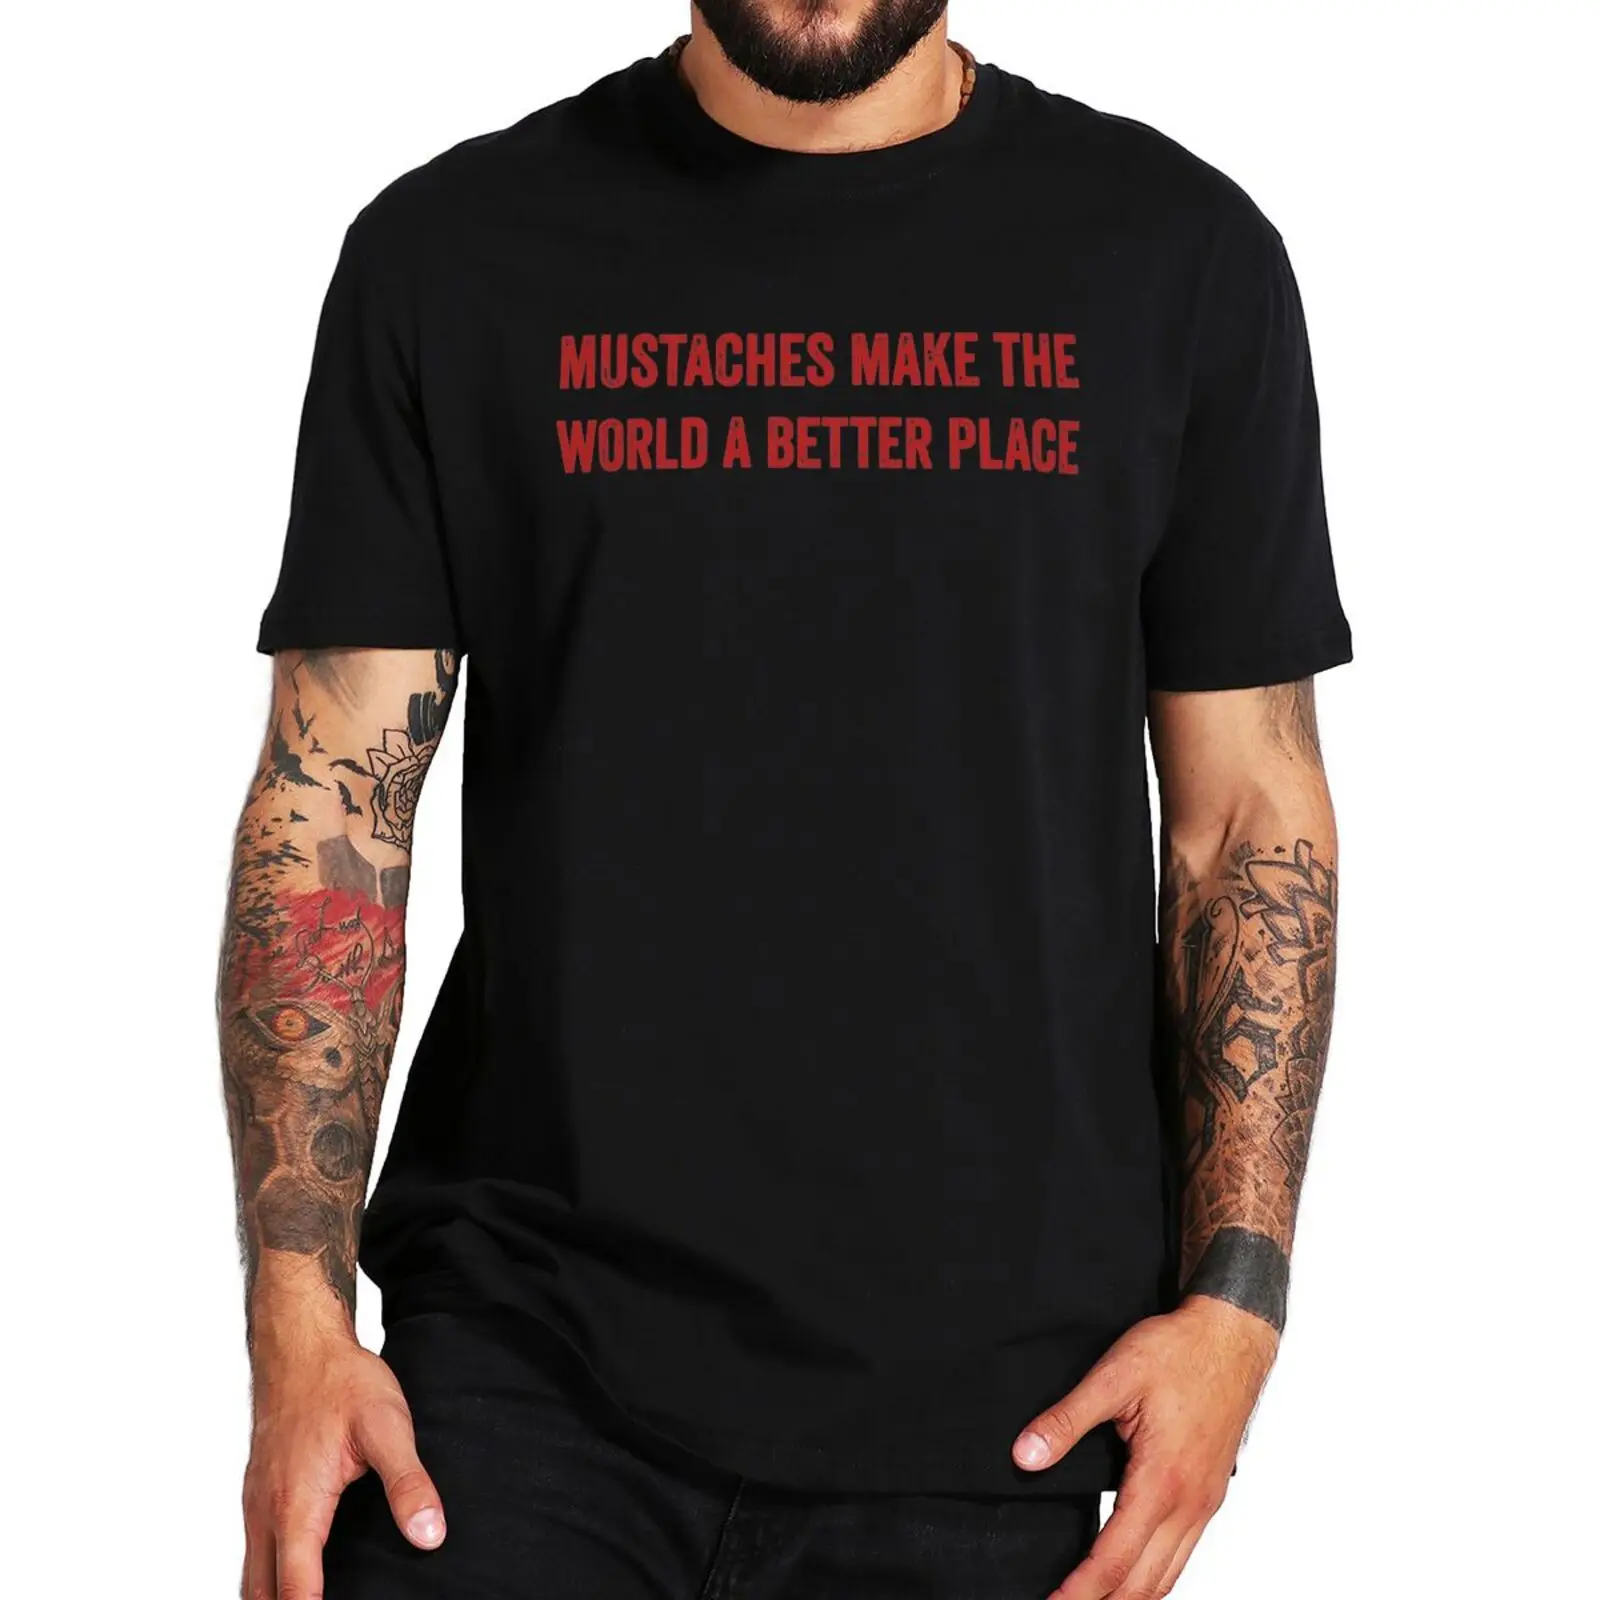 

Mustaches Make The World A Better Place T Shirt Funny Mustache Boyfriend Dad Gift Tops 100% Cotton Summer T-shirts